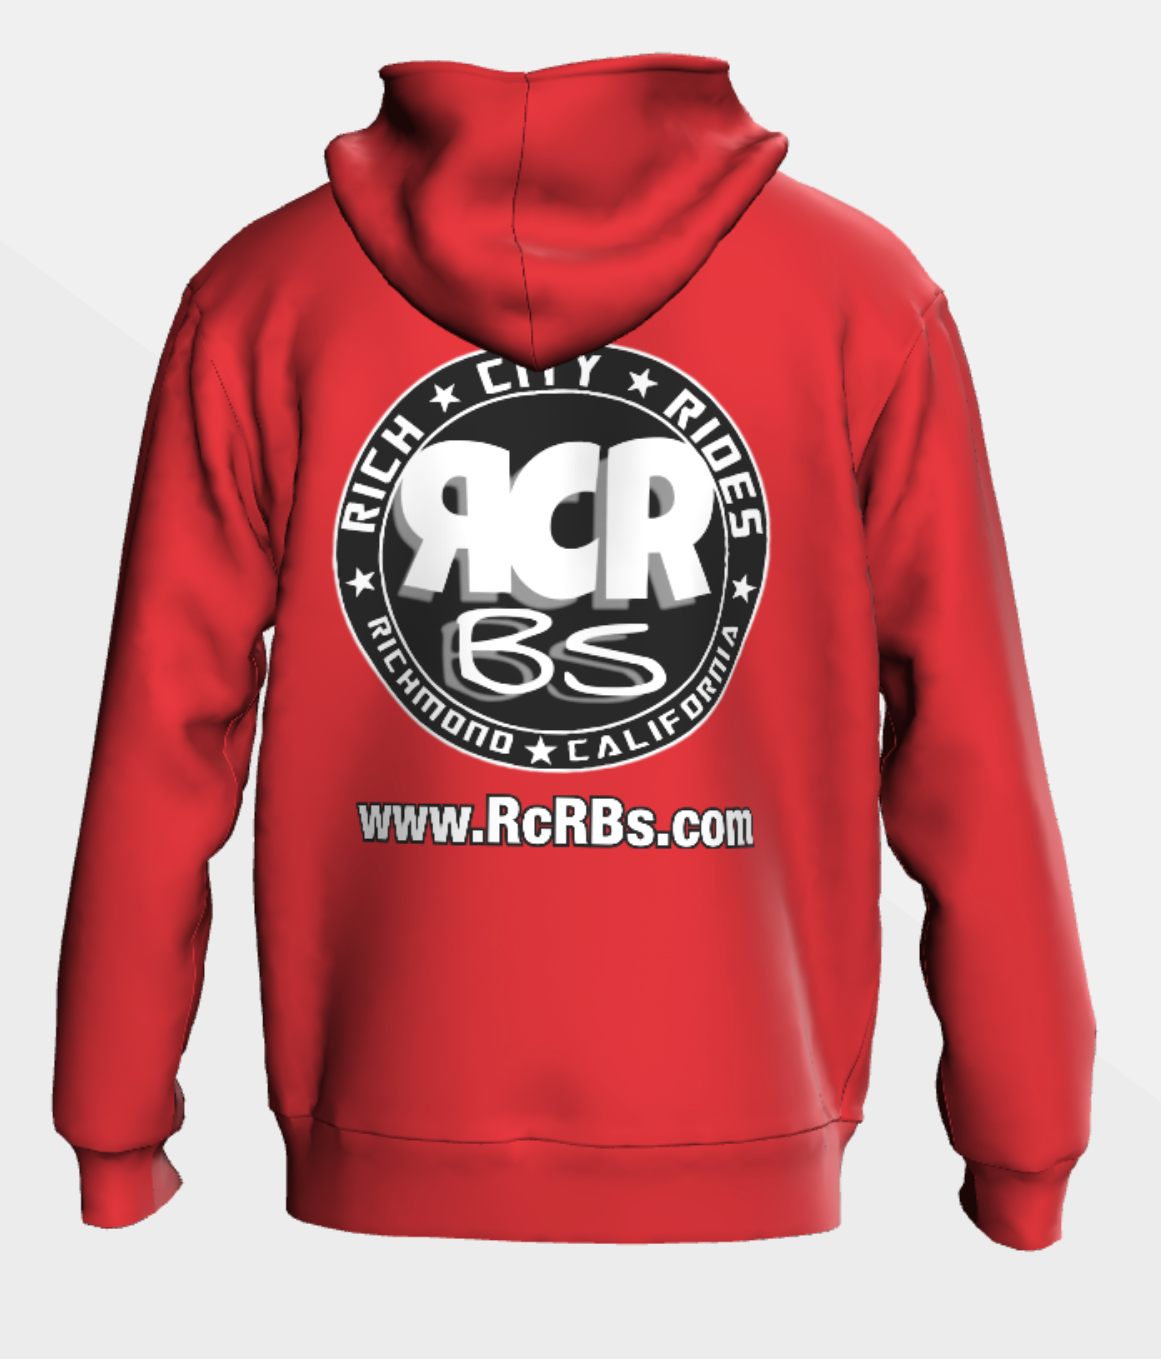 "Evry1's Brand" Rich City Hoodie w/ Graphic "RichCity FireFighters"